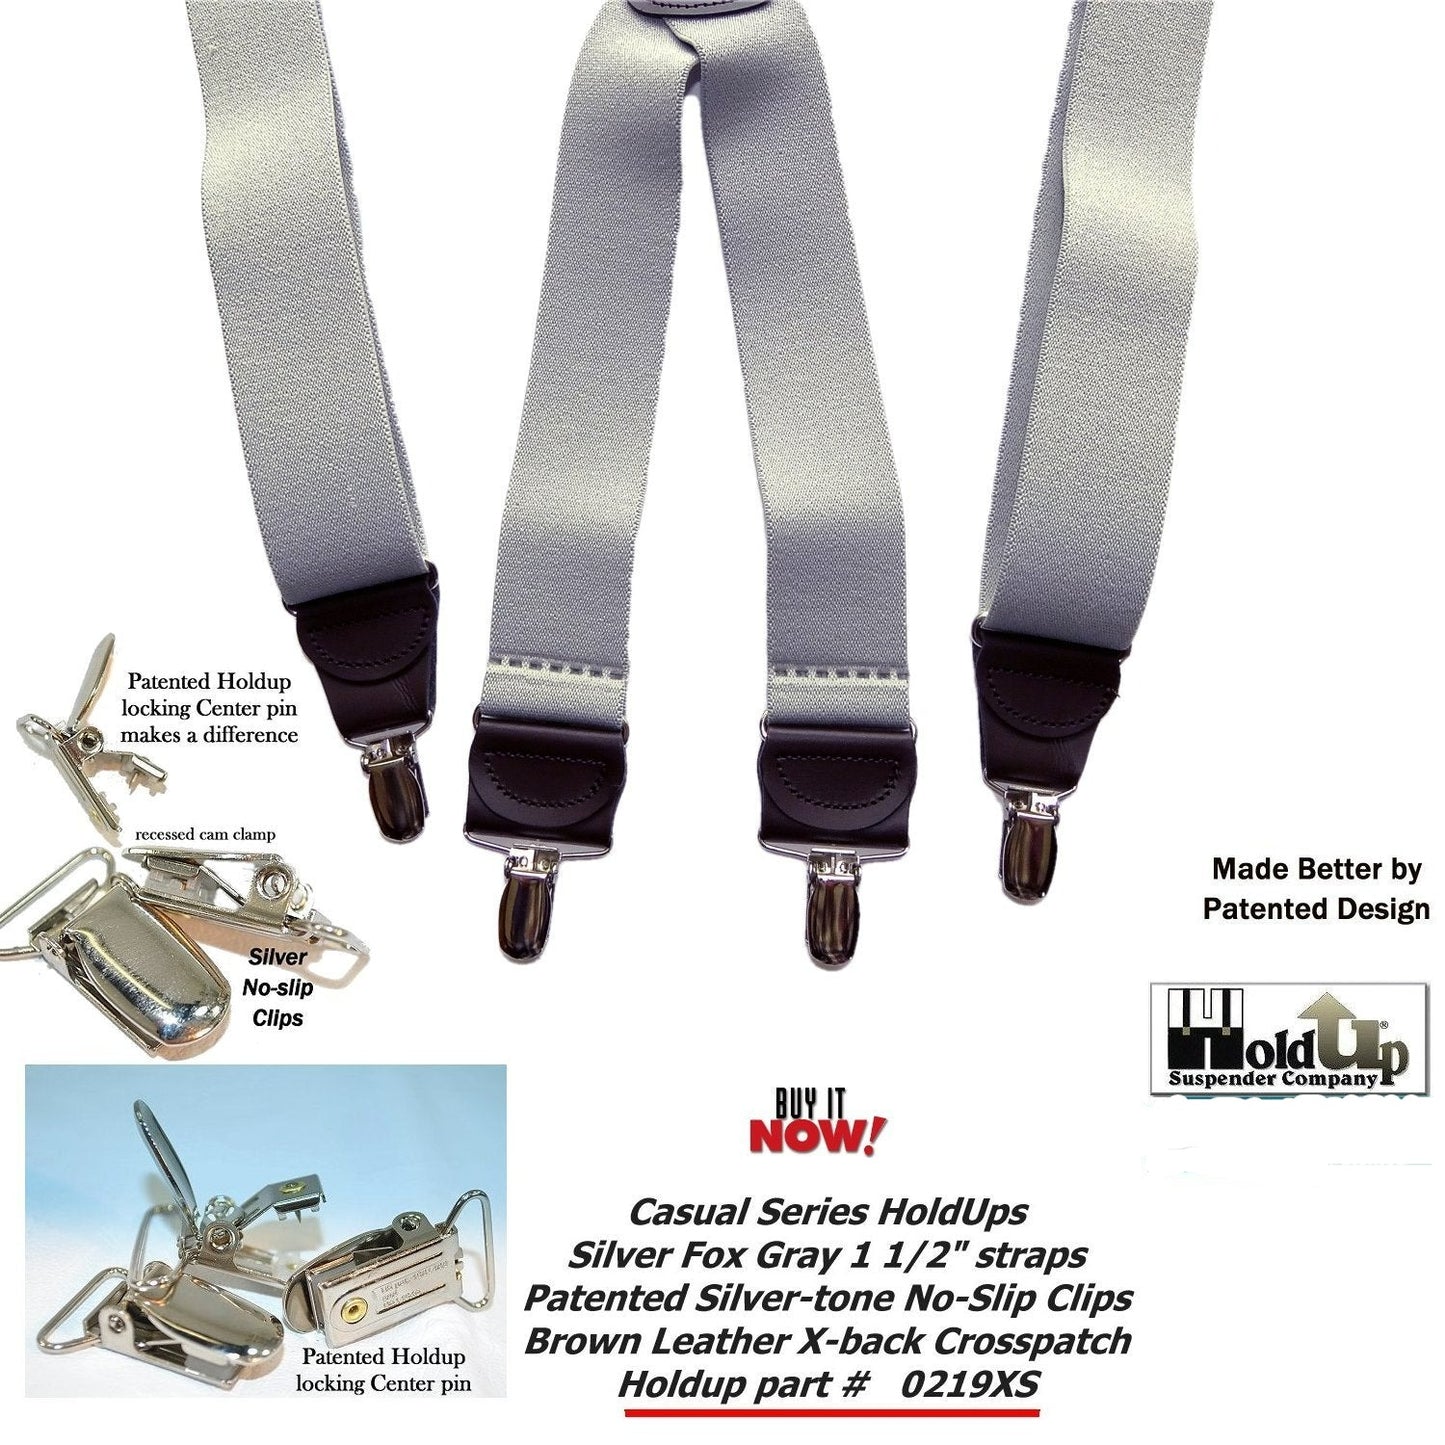 Holdup Brand Light Silver Fox Gray  1 1/2" Wide X-back Suspenders with USA Patented No-slip Silver-tone Clips